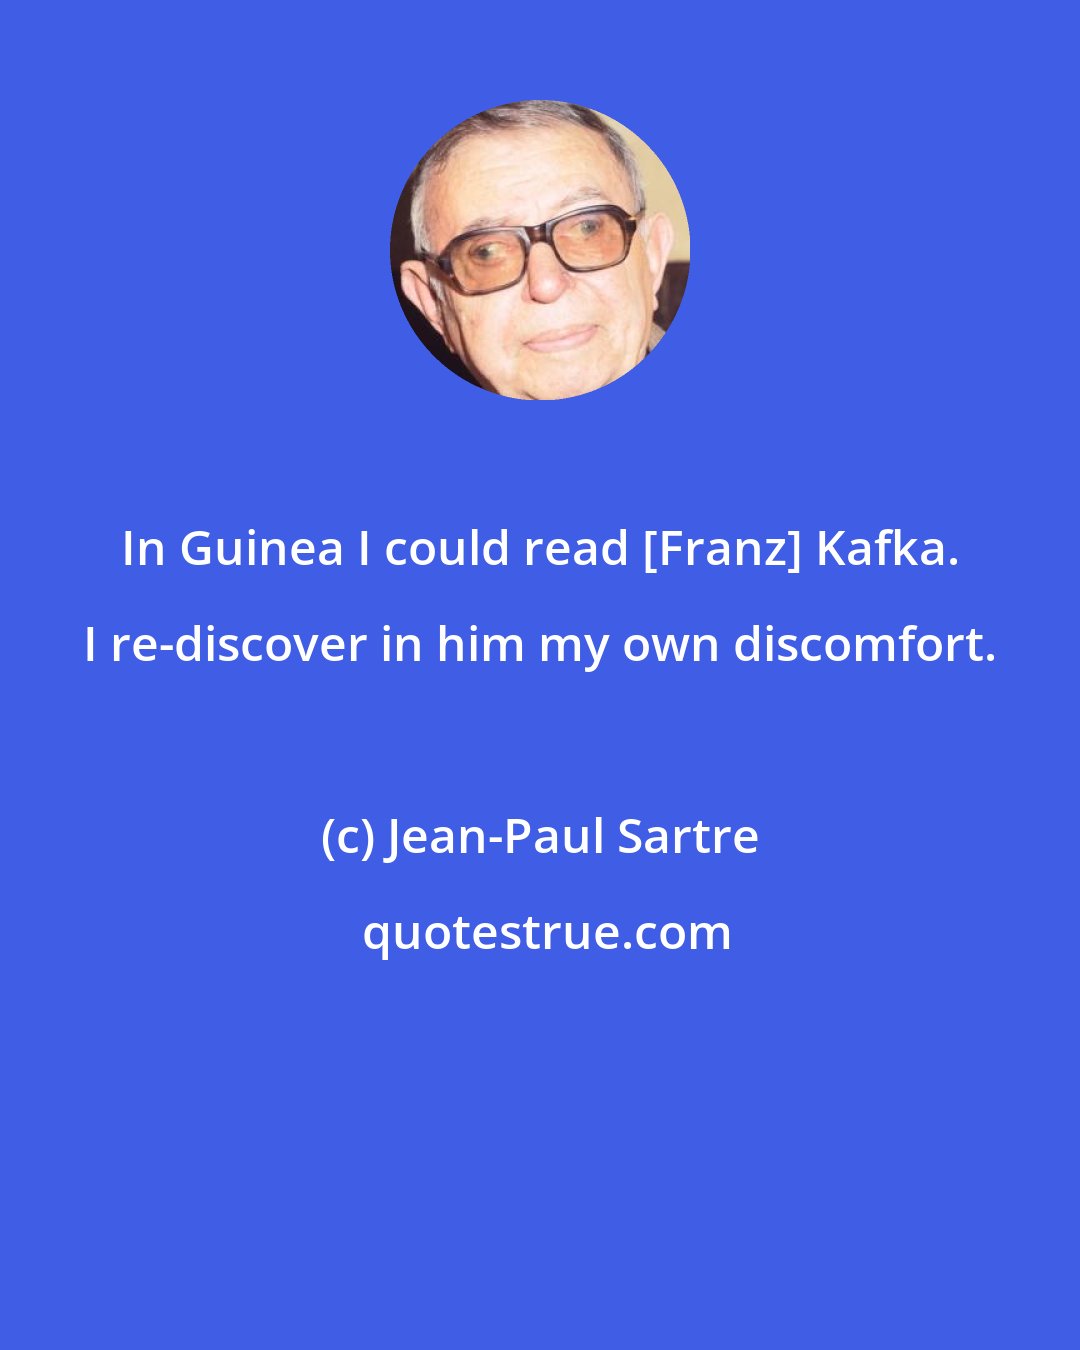 Jean-Paul Sartre: In Guinea I could read [Franz] Kafka. I re-discover in him my own discomfort.